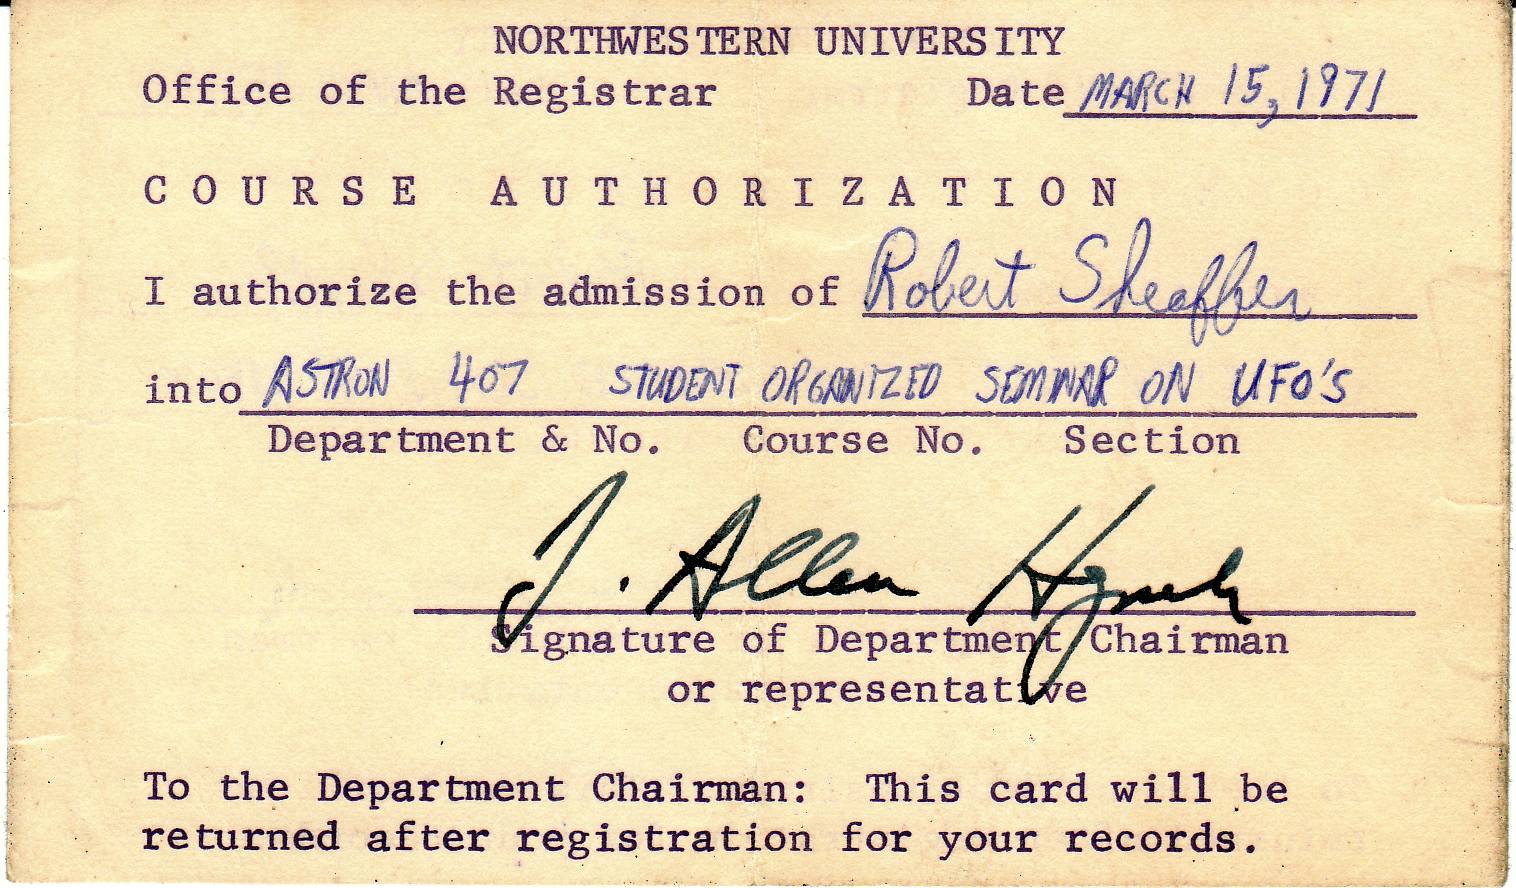 Hynek signed this authorization for me to en roll in the "Student Organized Seminar" on UFOs